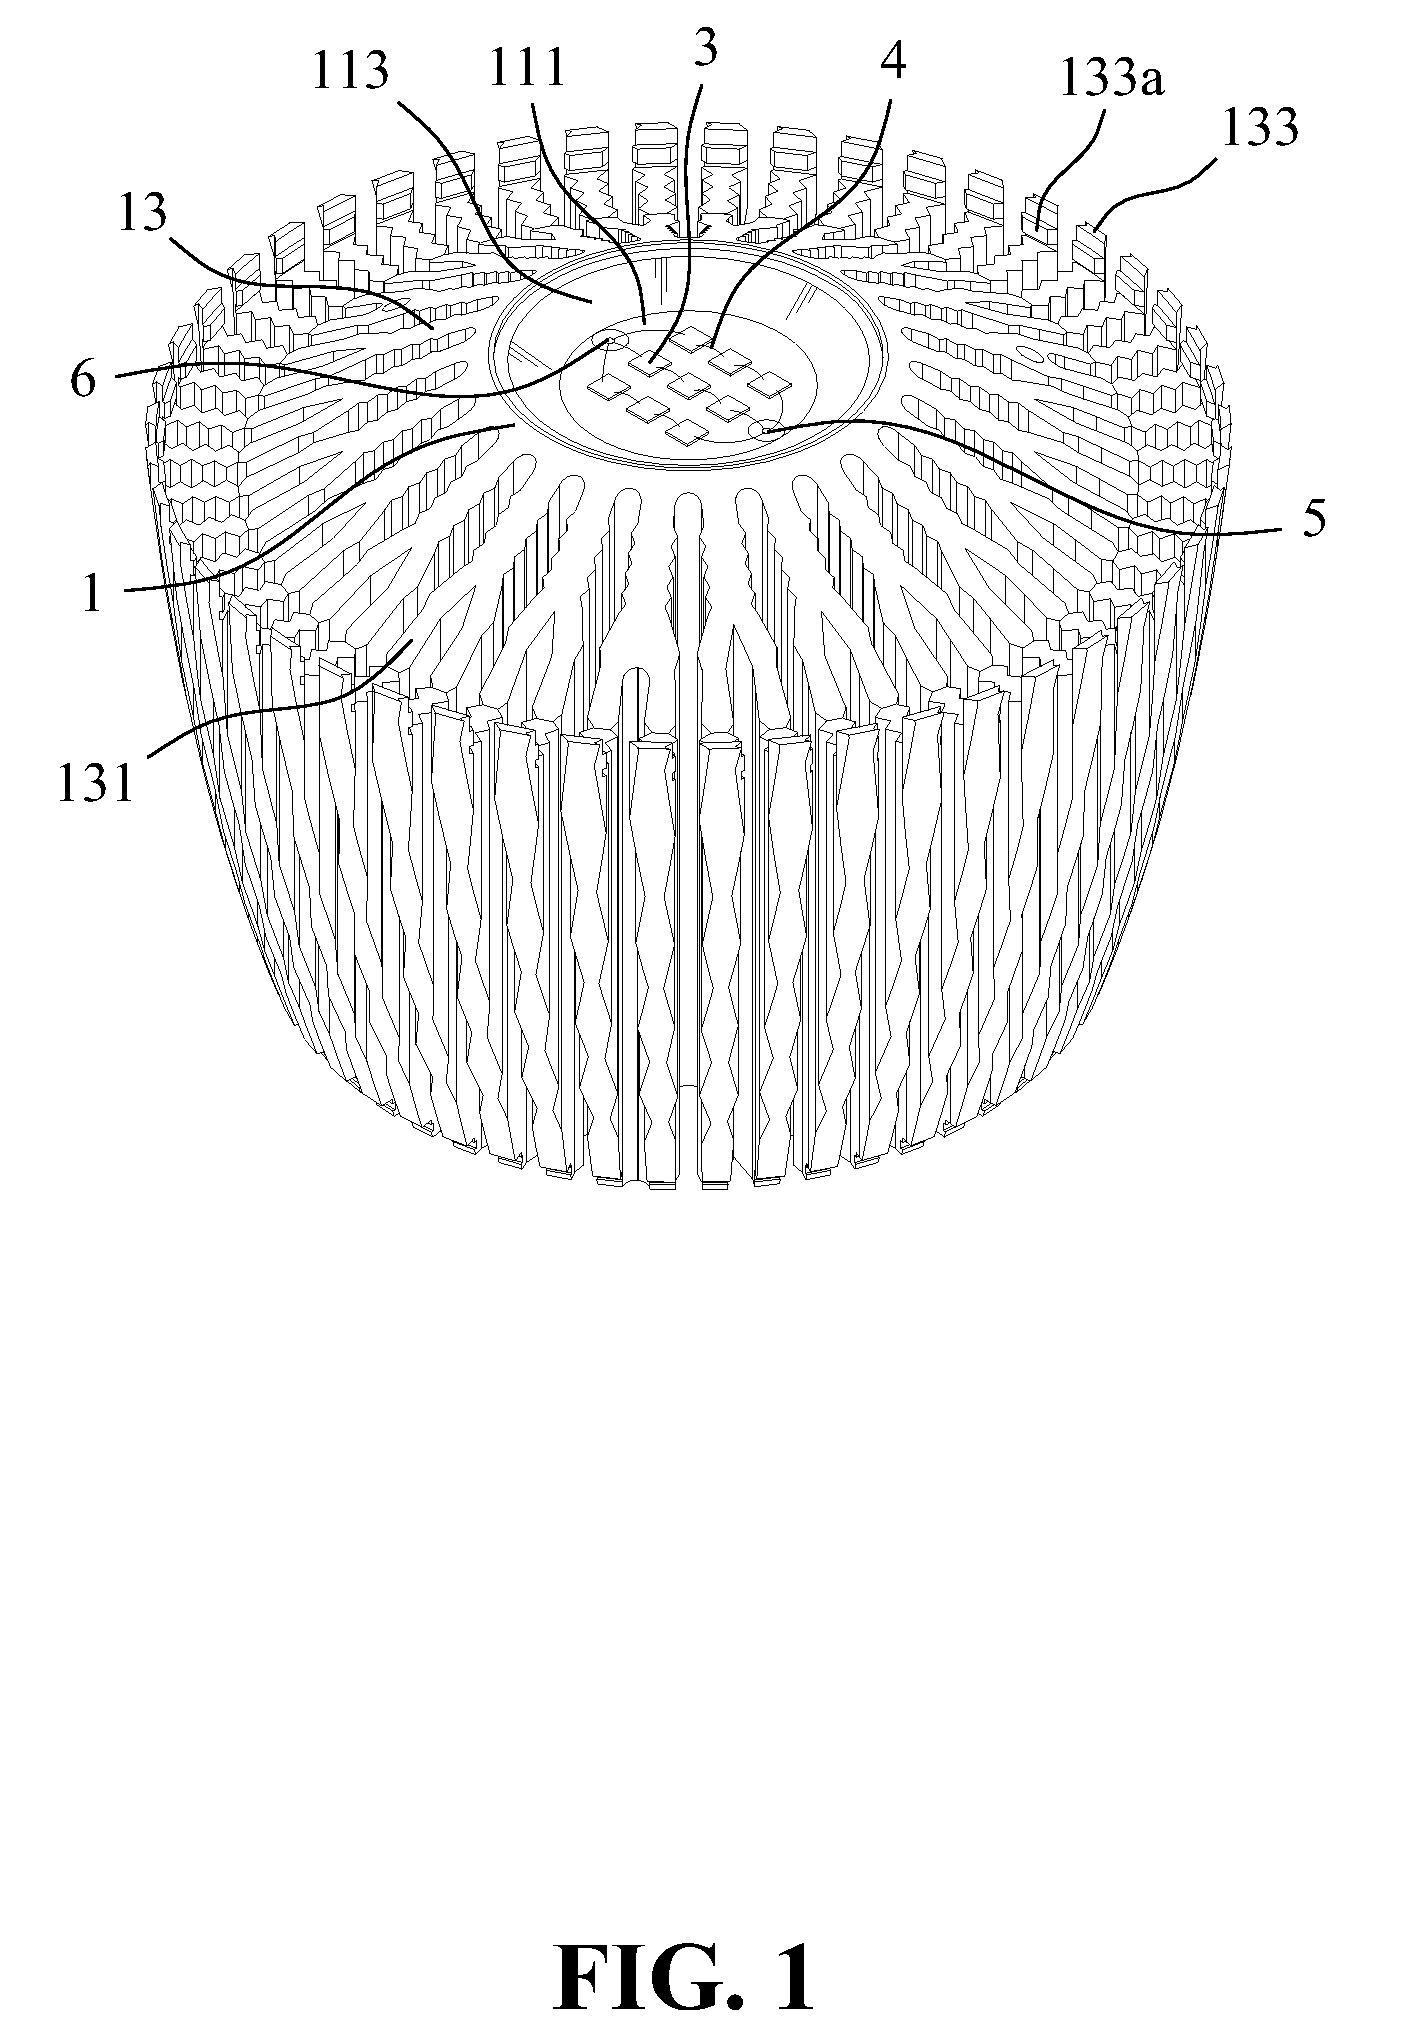 Integrally formed multi-layer light-emitting device